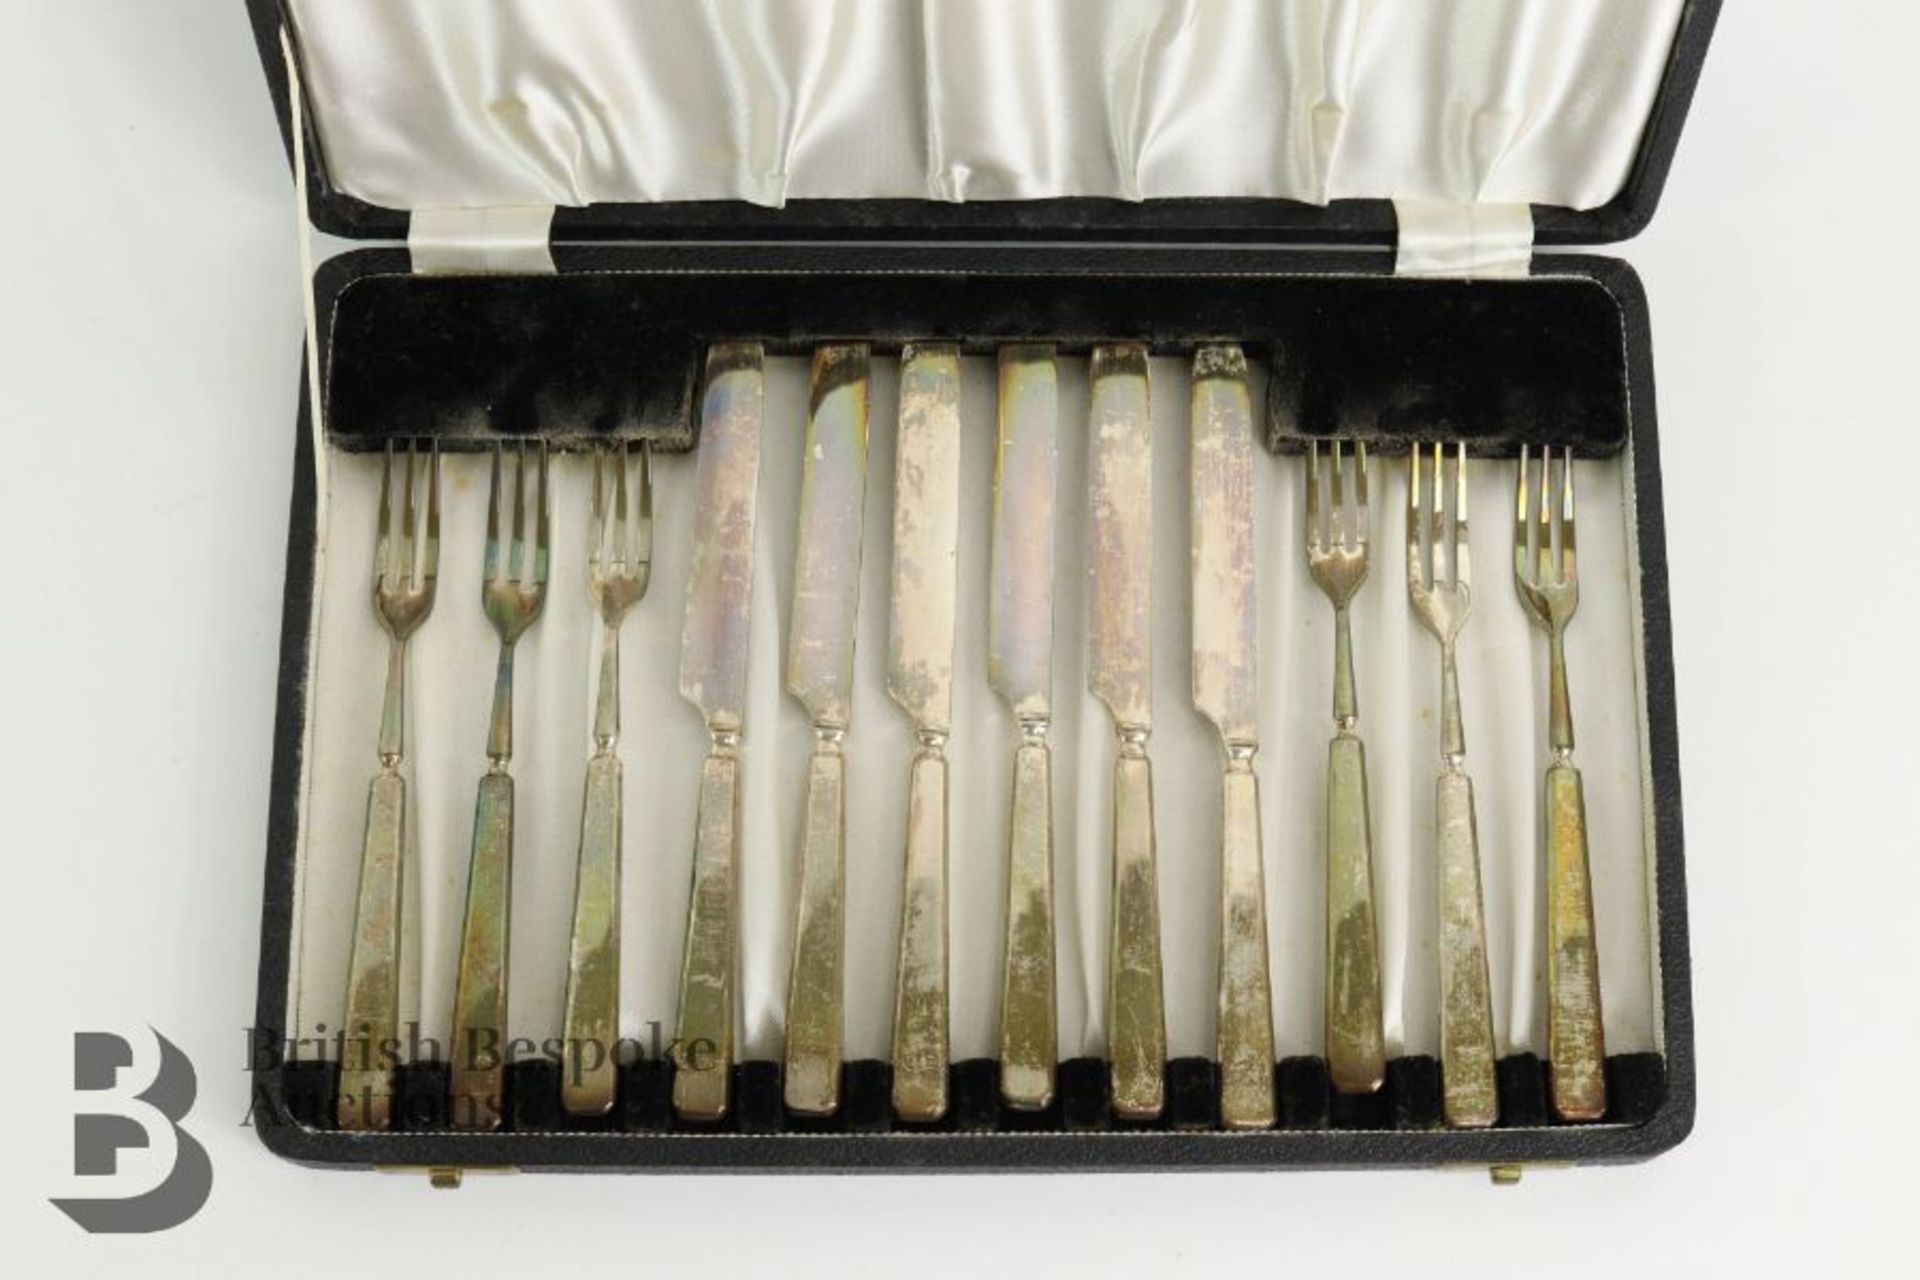 Boxed Set of Silver Fruit Knives and Forks - Image 2 of 5